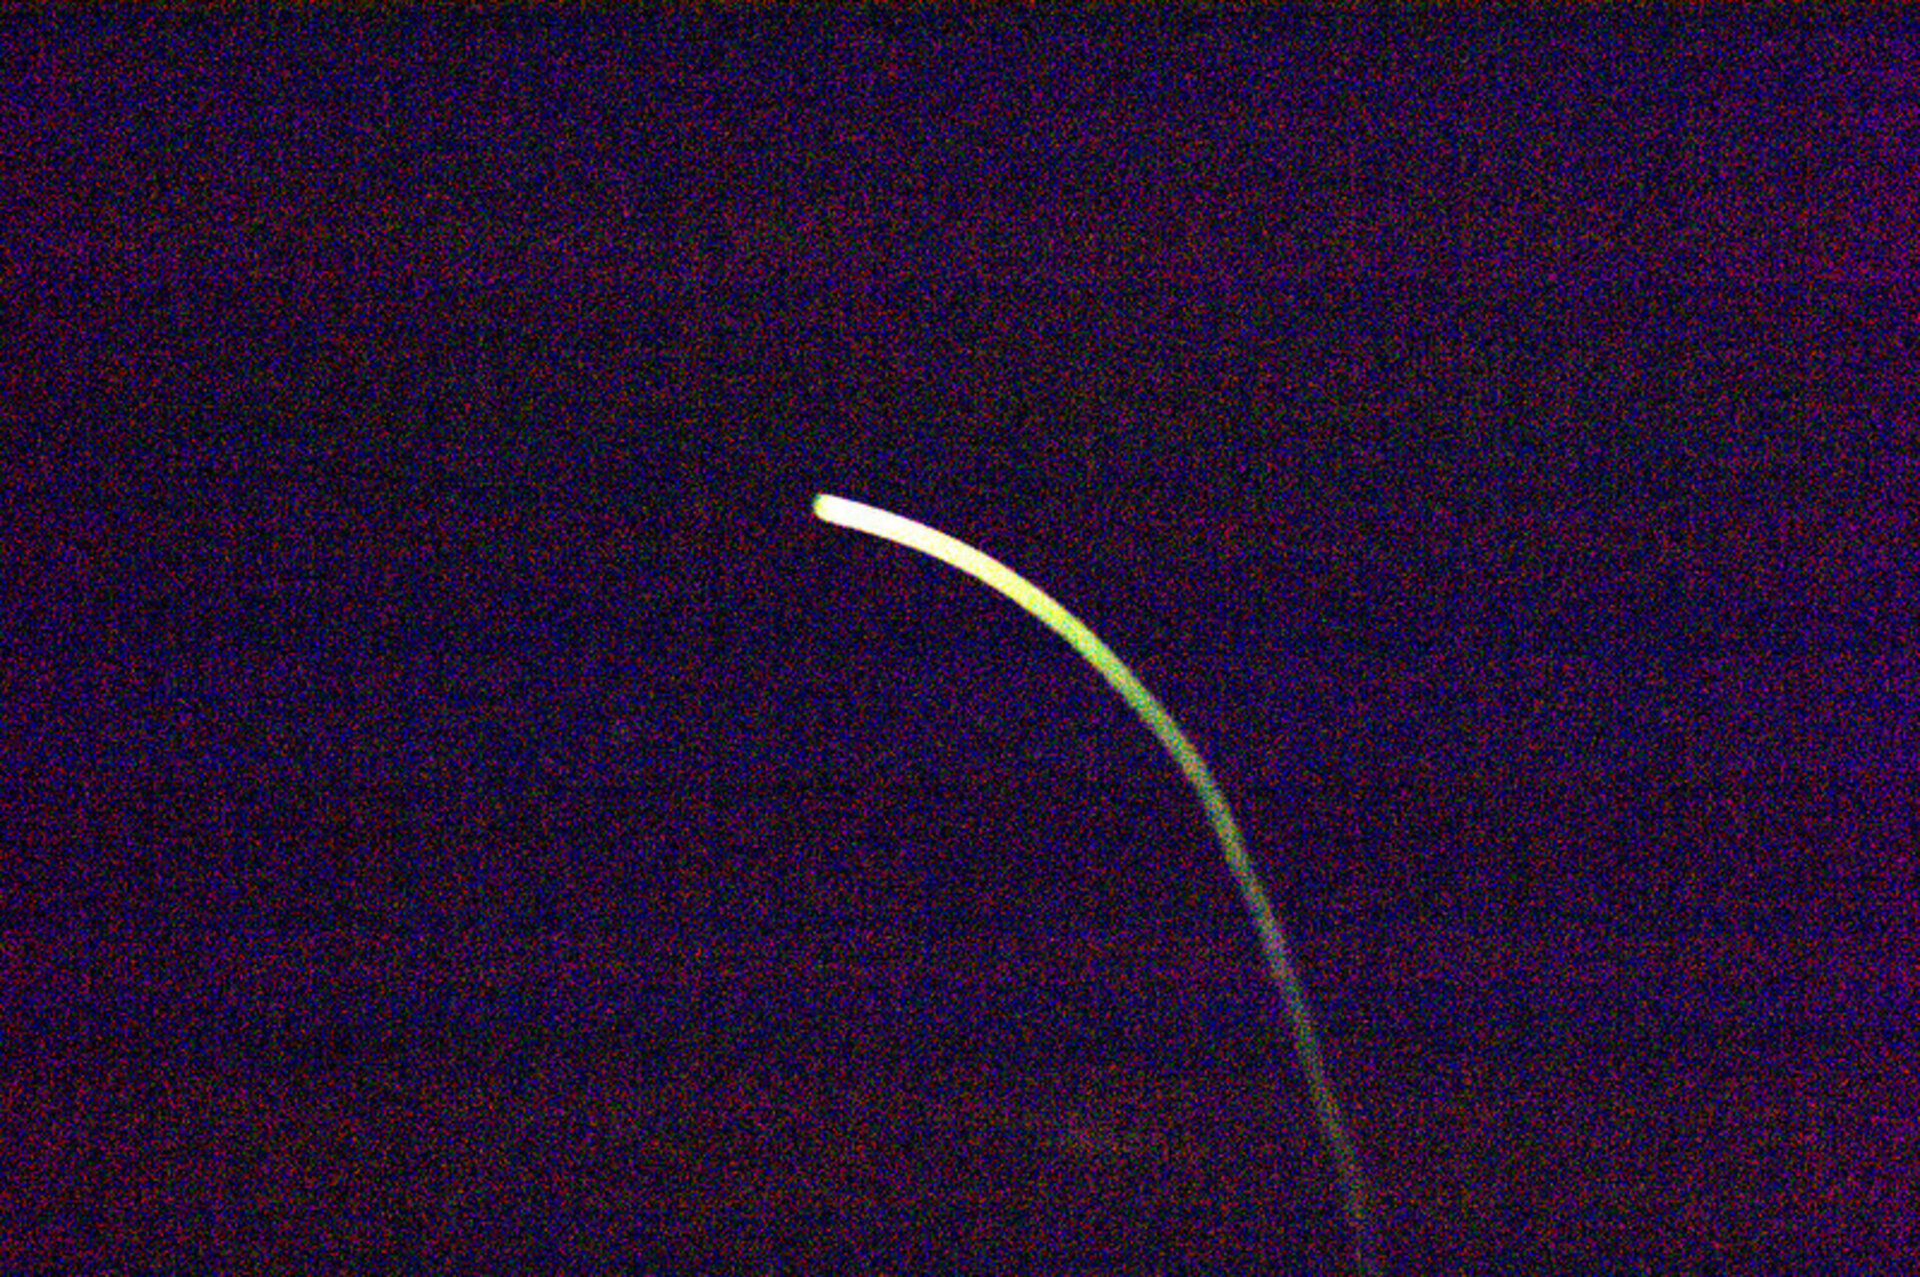 Plasma trail produced by Space Shuttle Endeavour